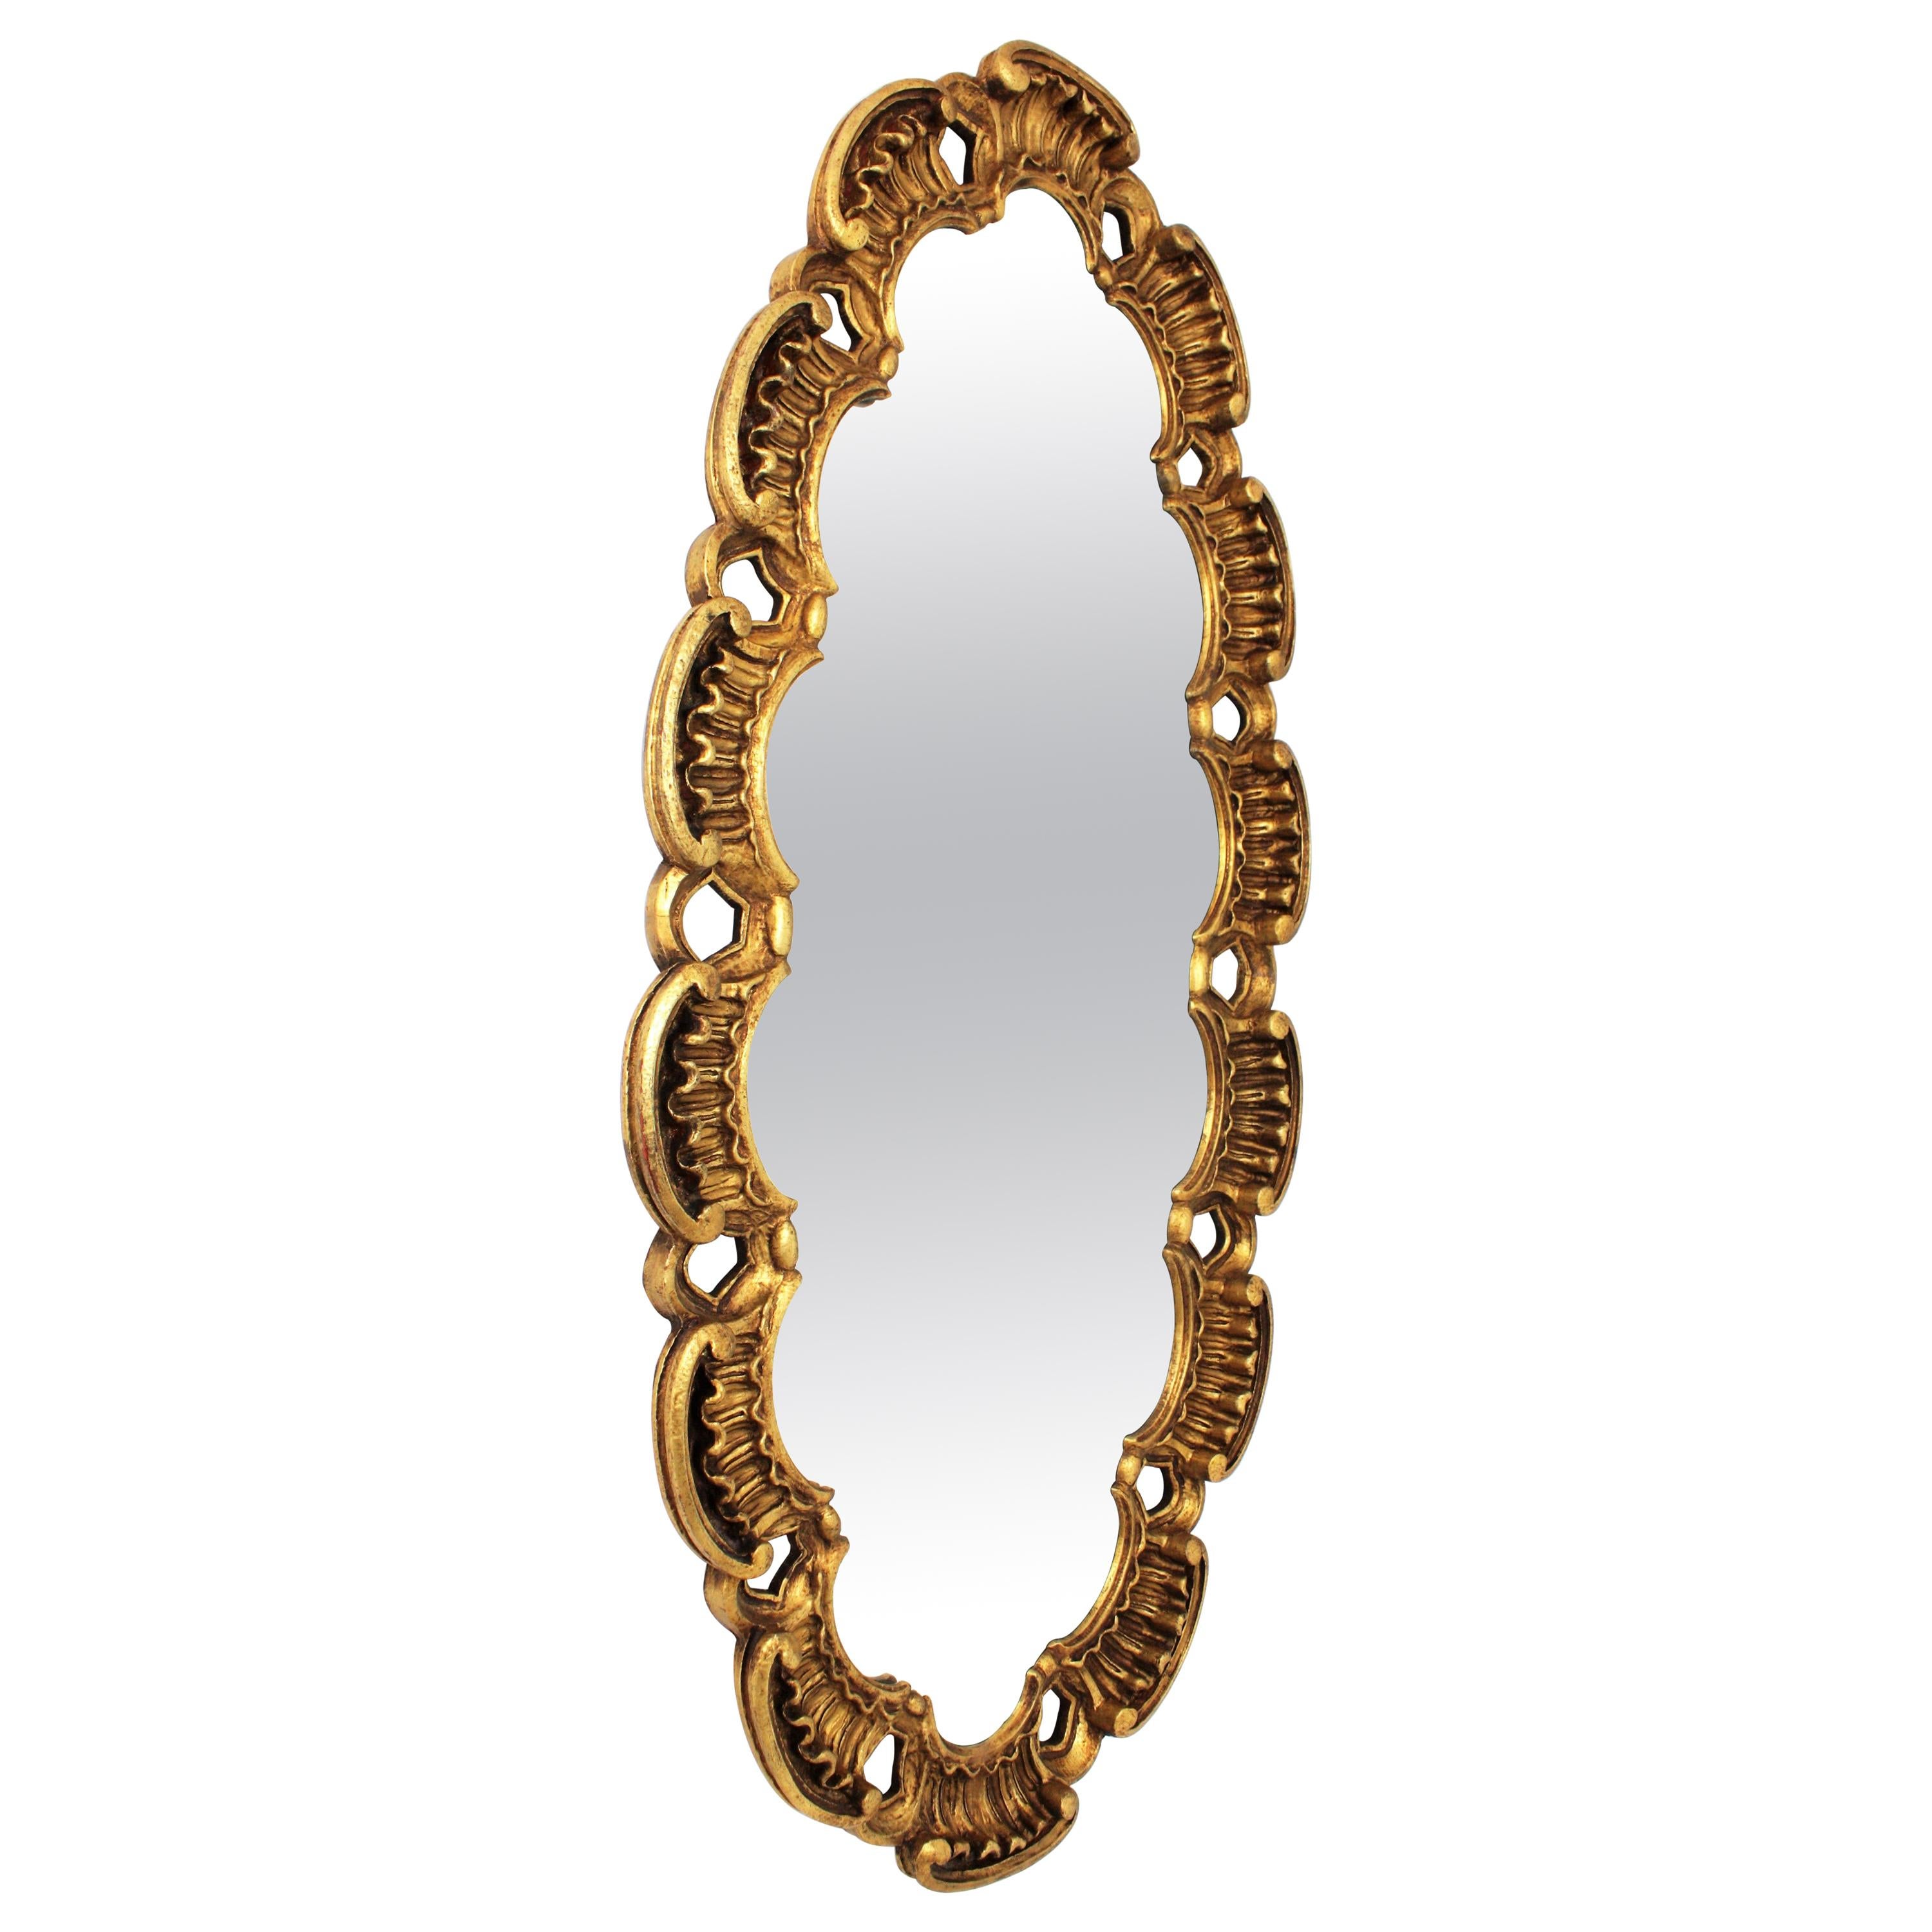 Francisco Hurtado Scrollwork Giltwood Carved Oval Mirror
One of a kind giltwood carved oval mirror with a highly decorative scalloped scroll-work frame. Manufactured by Francisco Hurtado, Spain, 1950-1960.
Francisco Hurtado was an Spanish cabinet